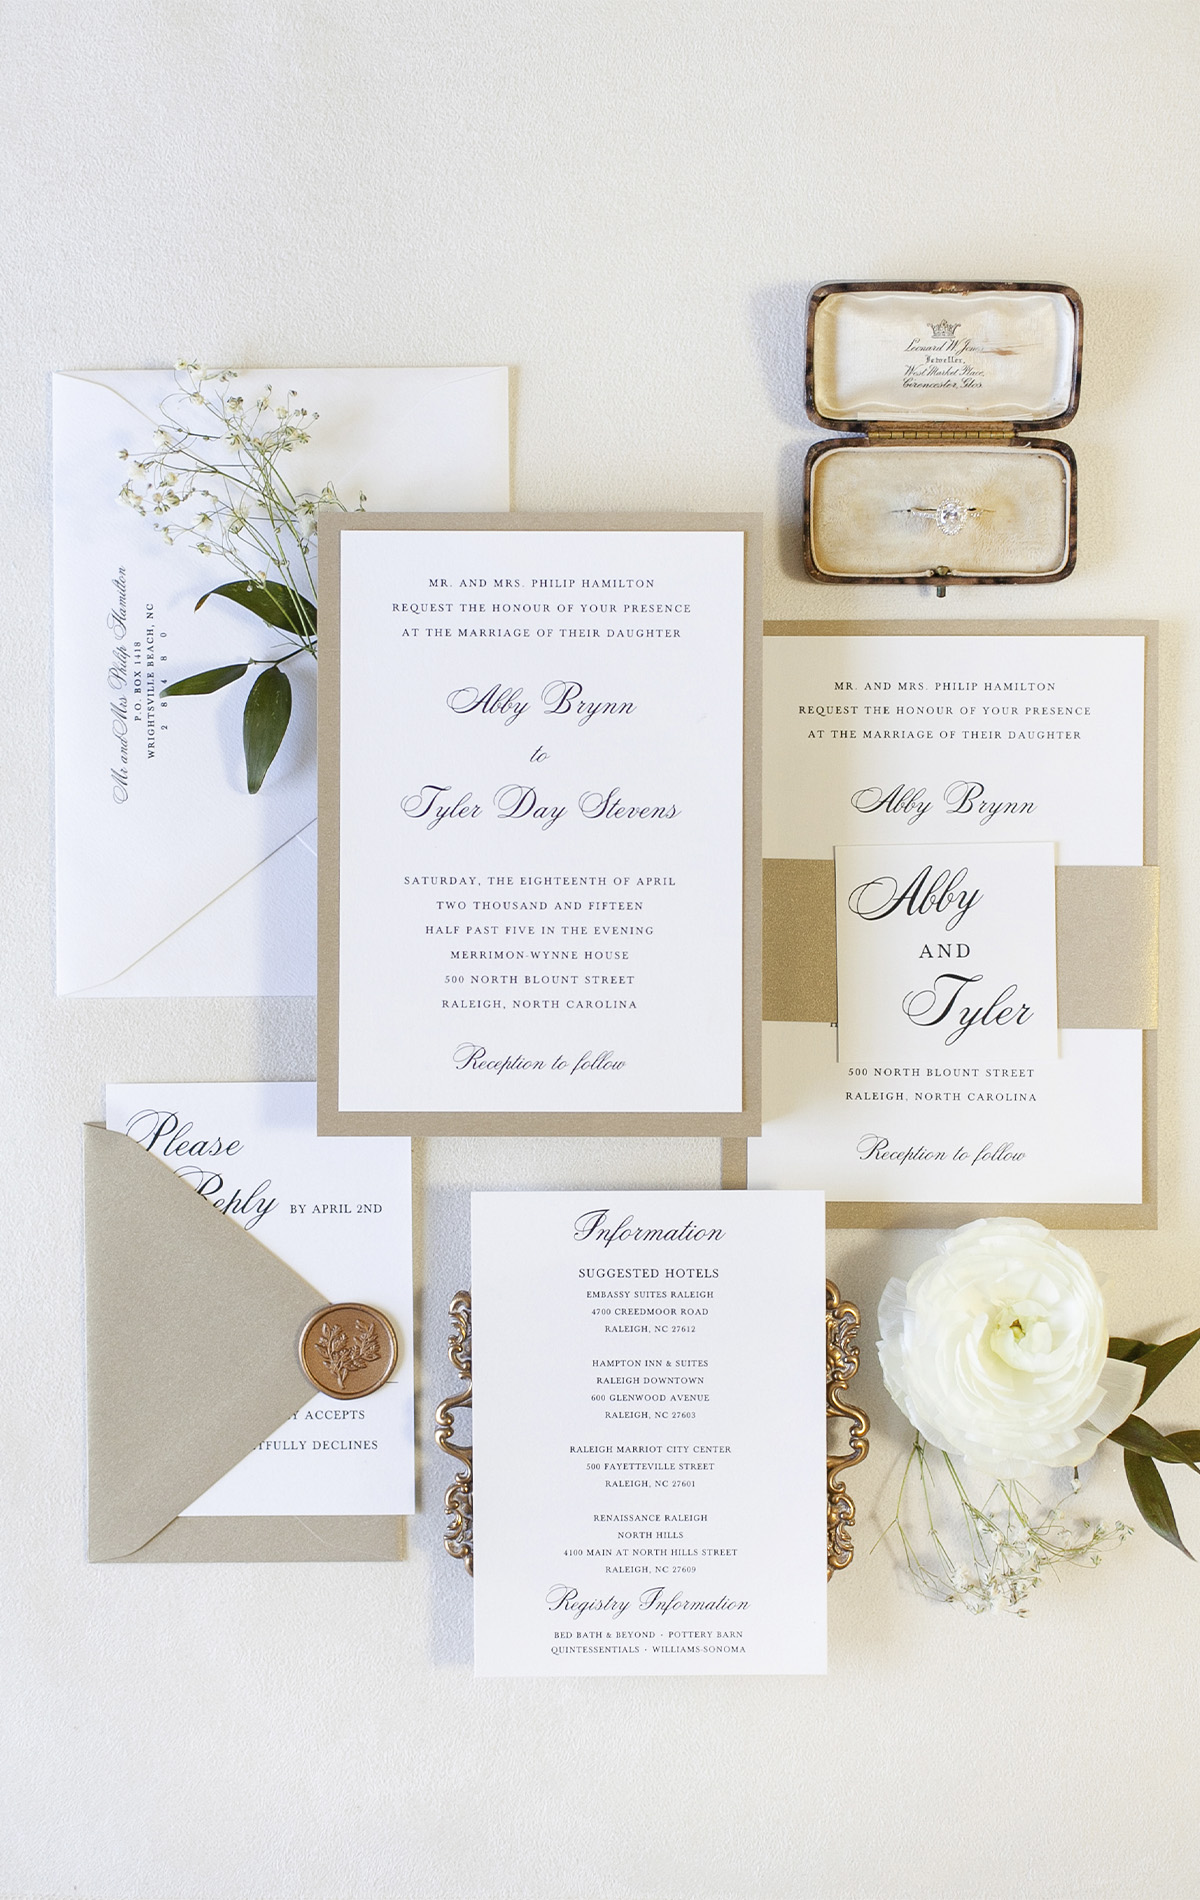 Alexis Scott - Home Website Slider Image - Classic wedding invitations with tan and cream accents